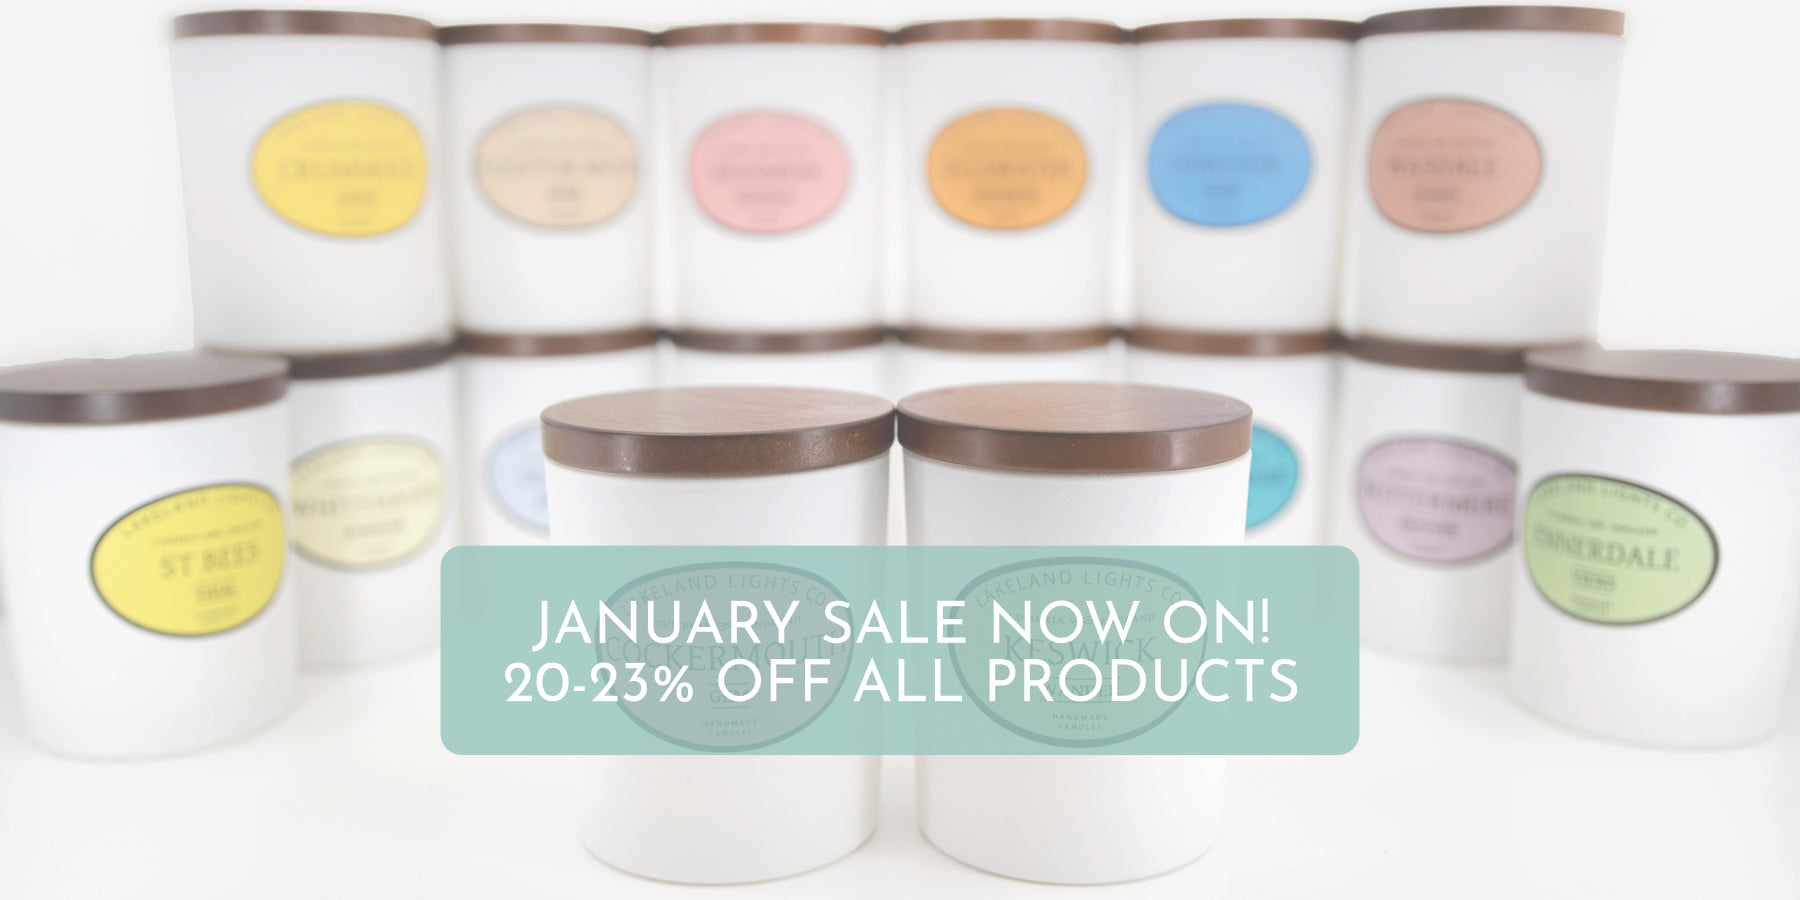 Our January Sale is Now On! 20-23% Off!